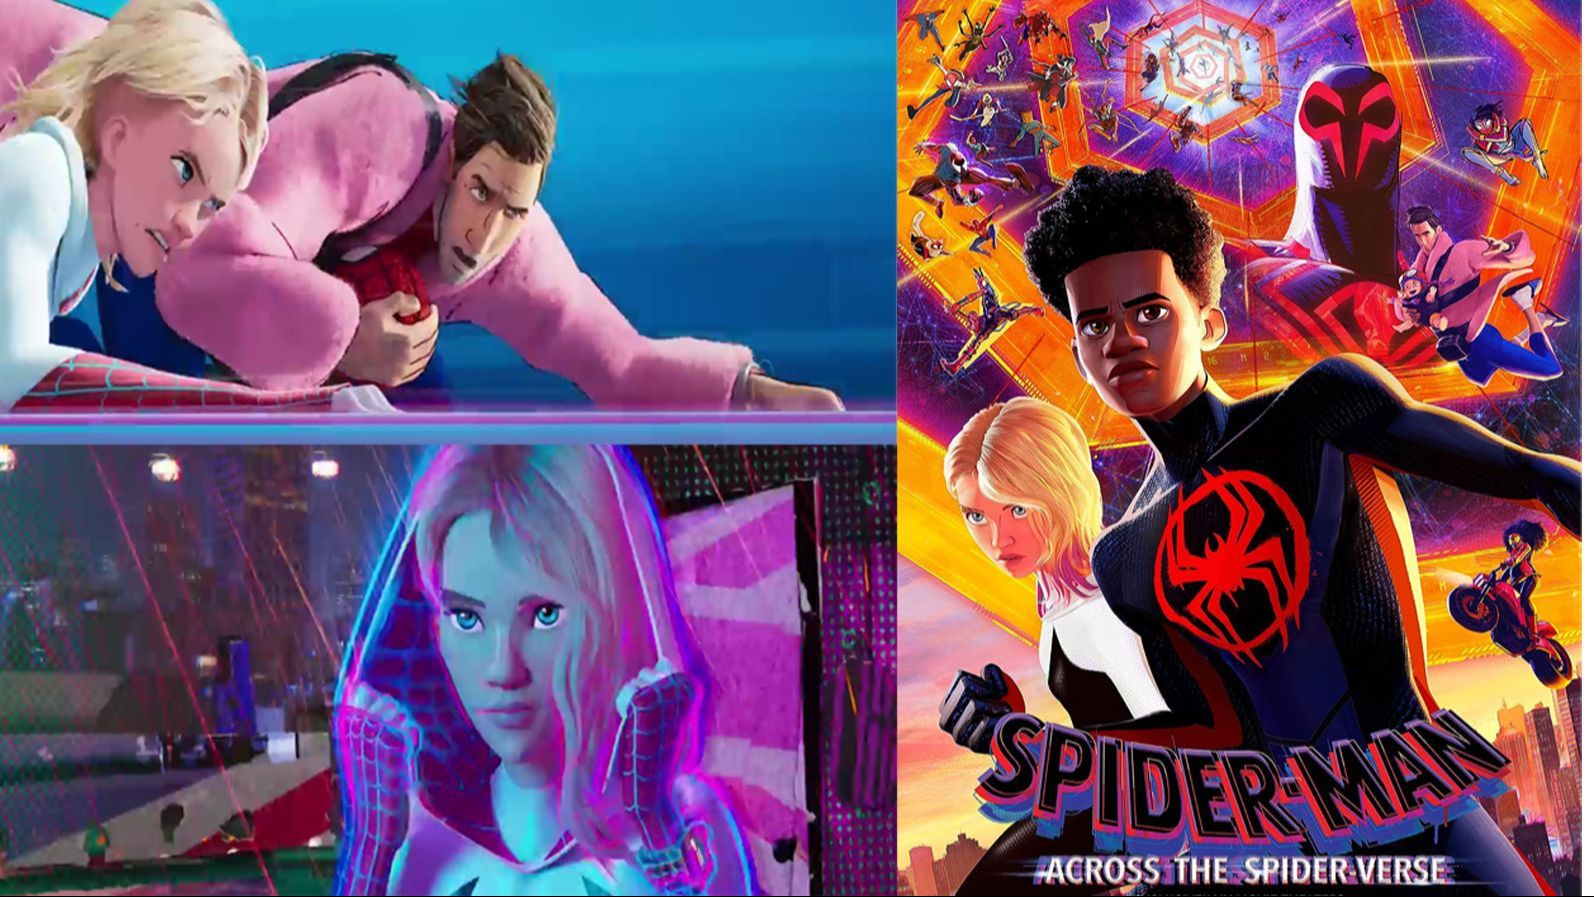 WATCH FULL SPIDER-MAN- ACROSS THE SPIDER-VERSE MOVIES FOR FREE - BiliBili